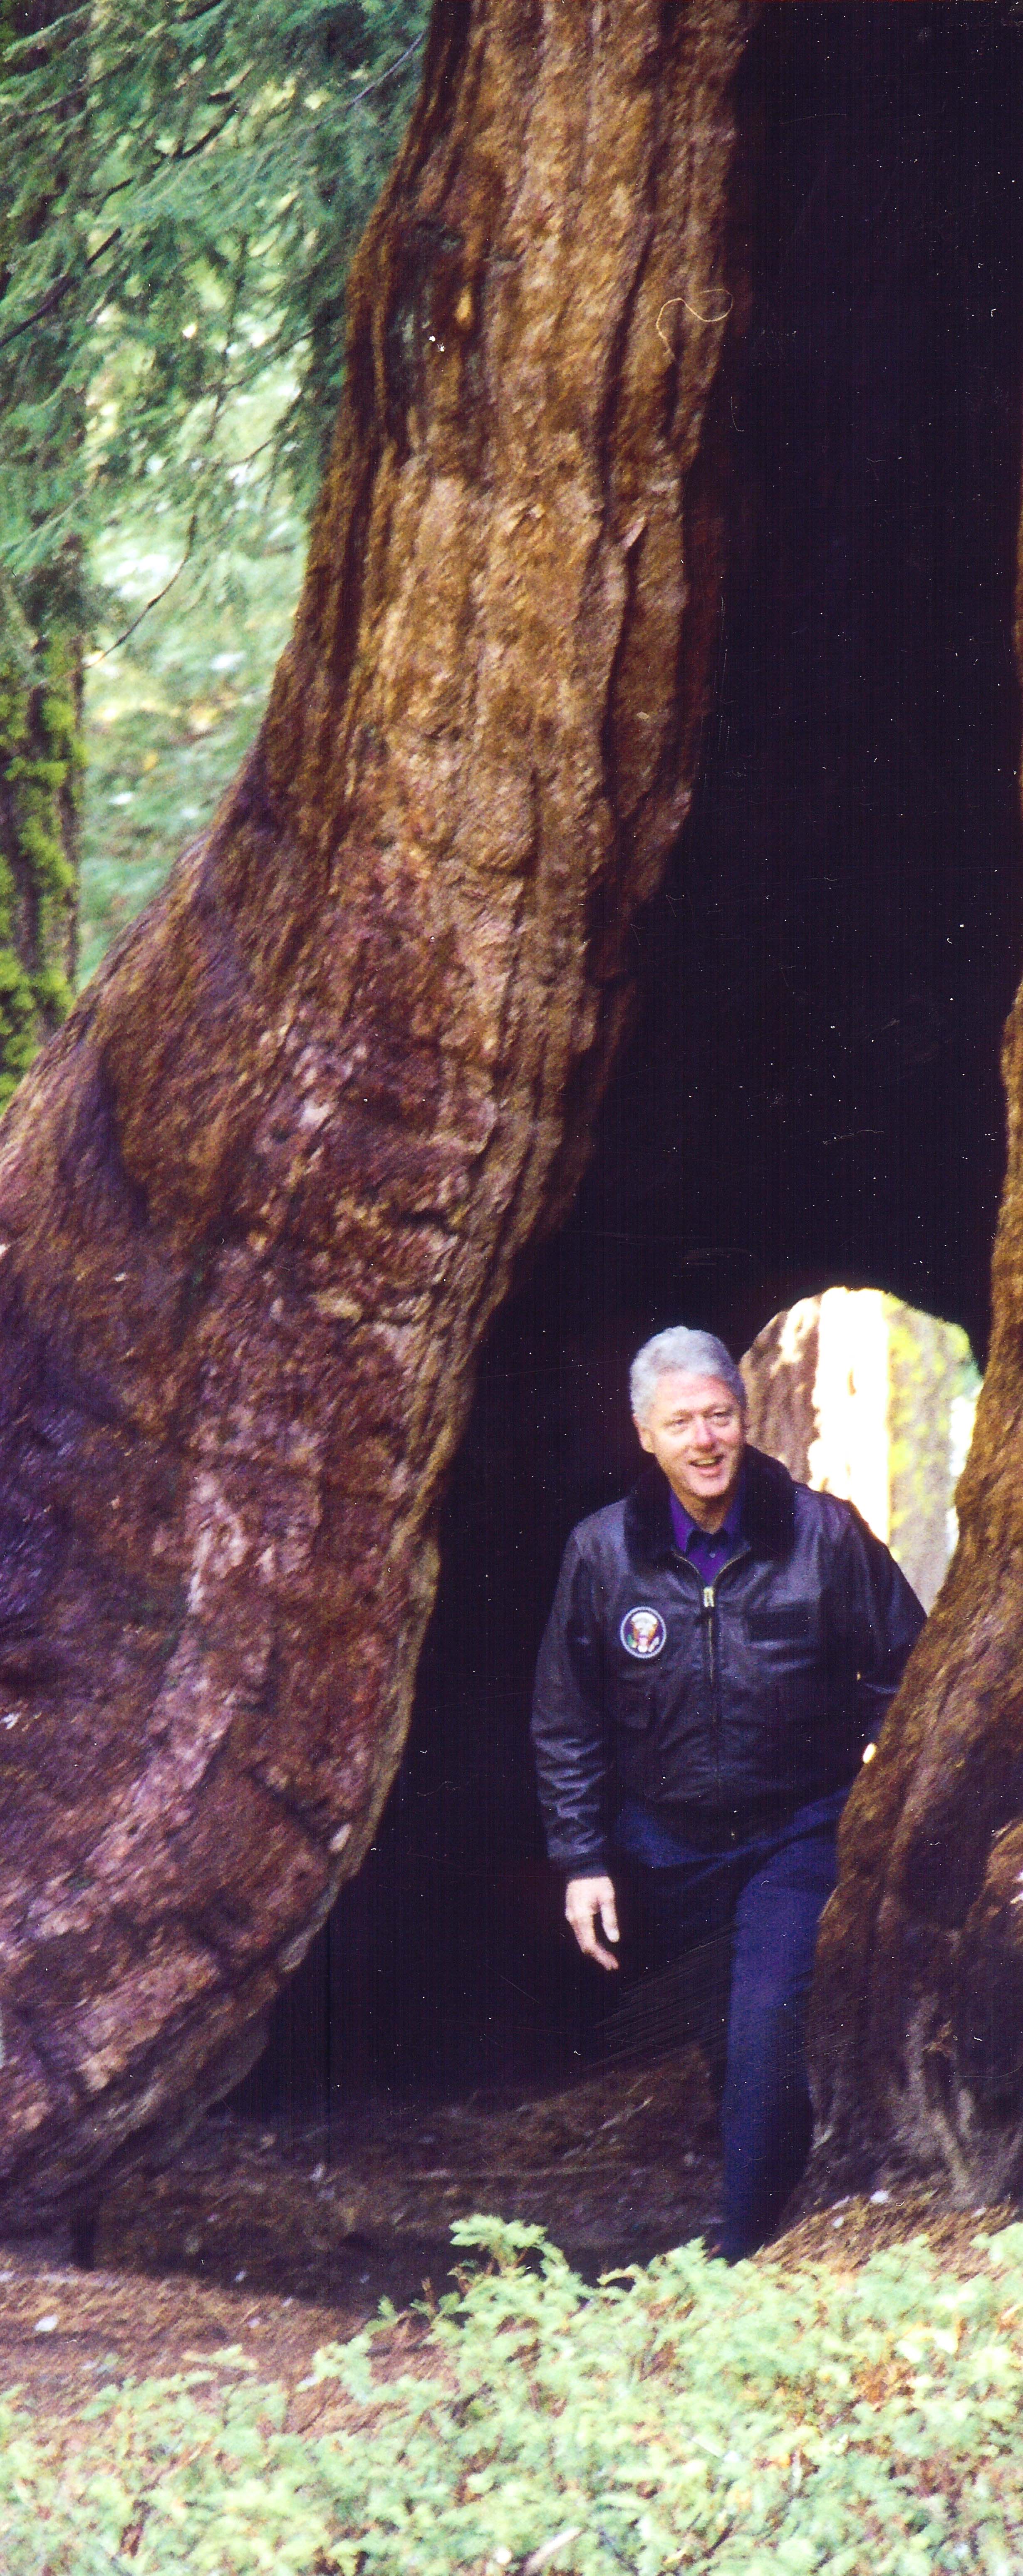 President Clinton visits the giant sequoia where he signed the Proclamation